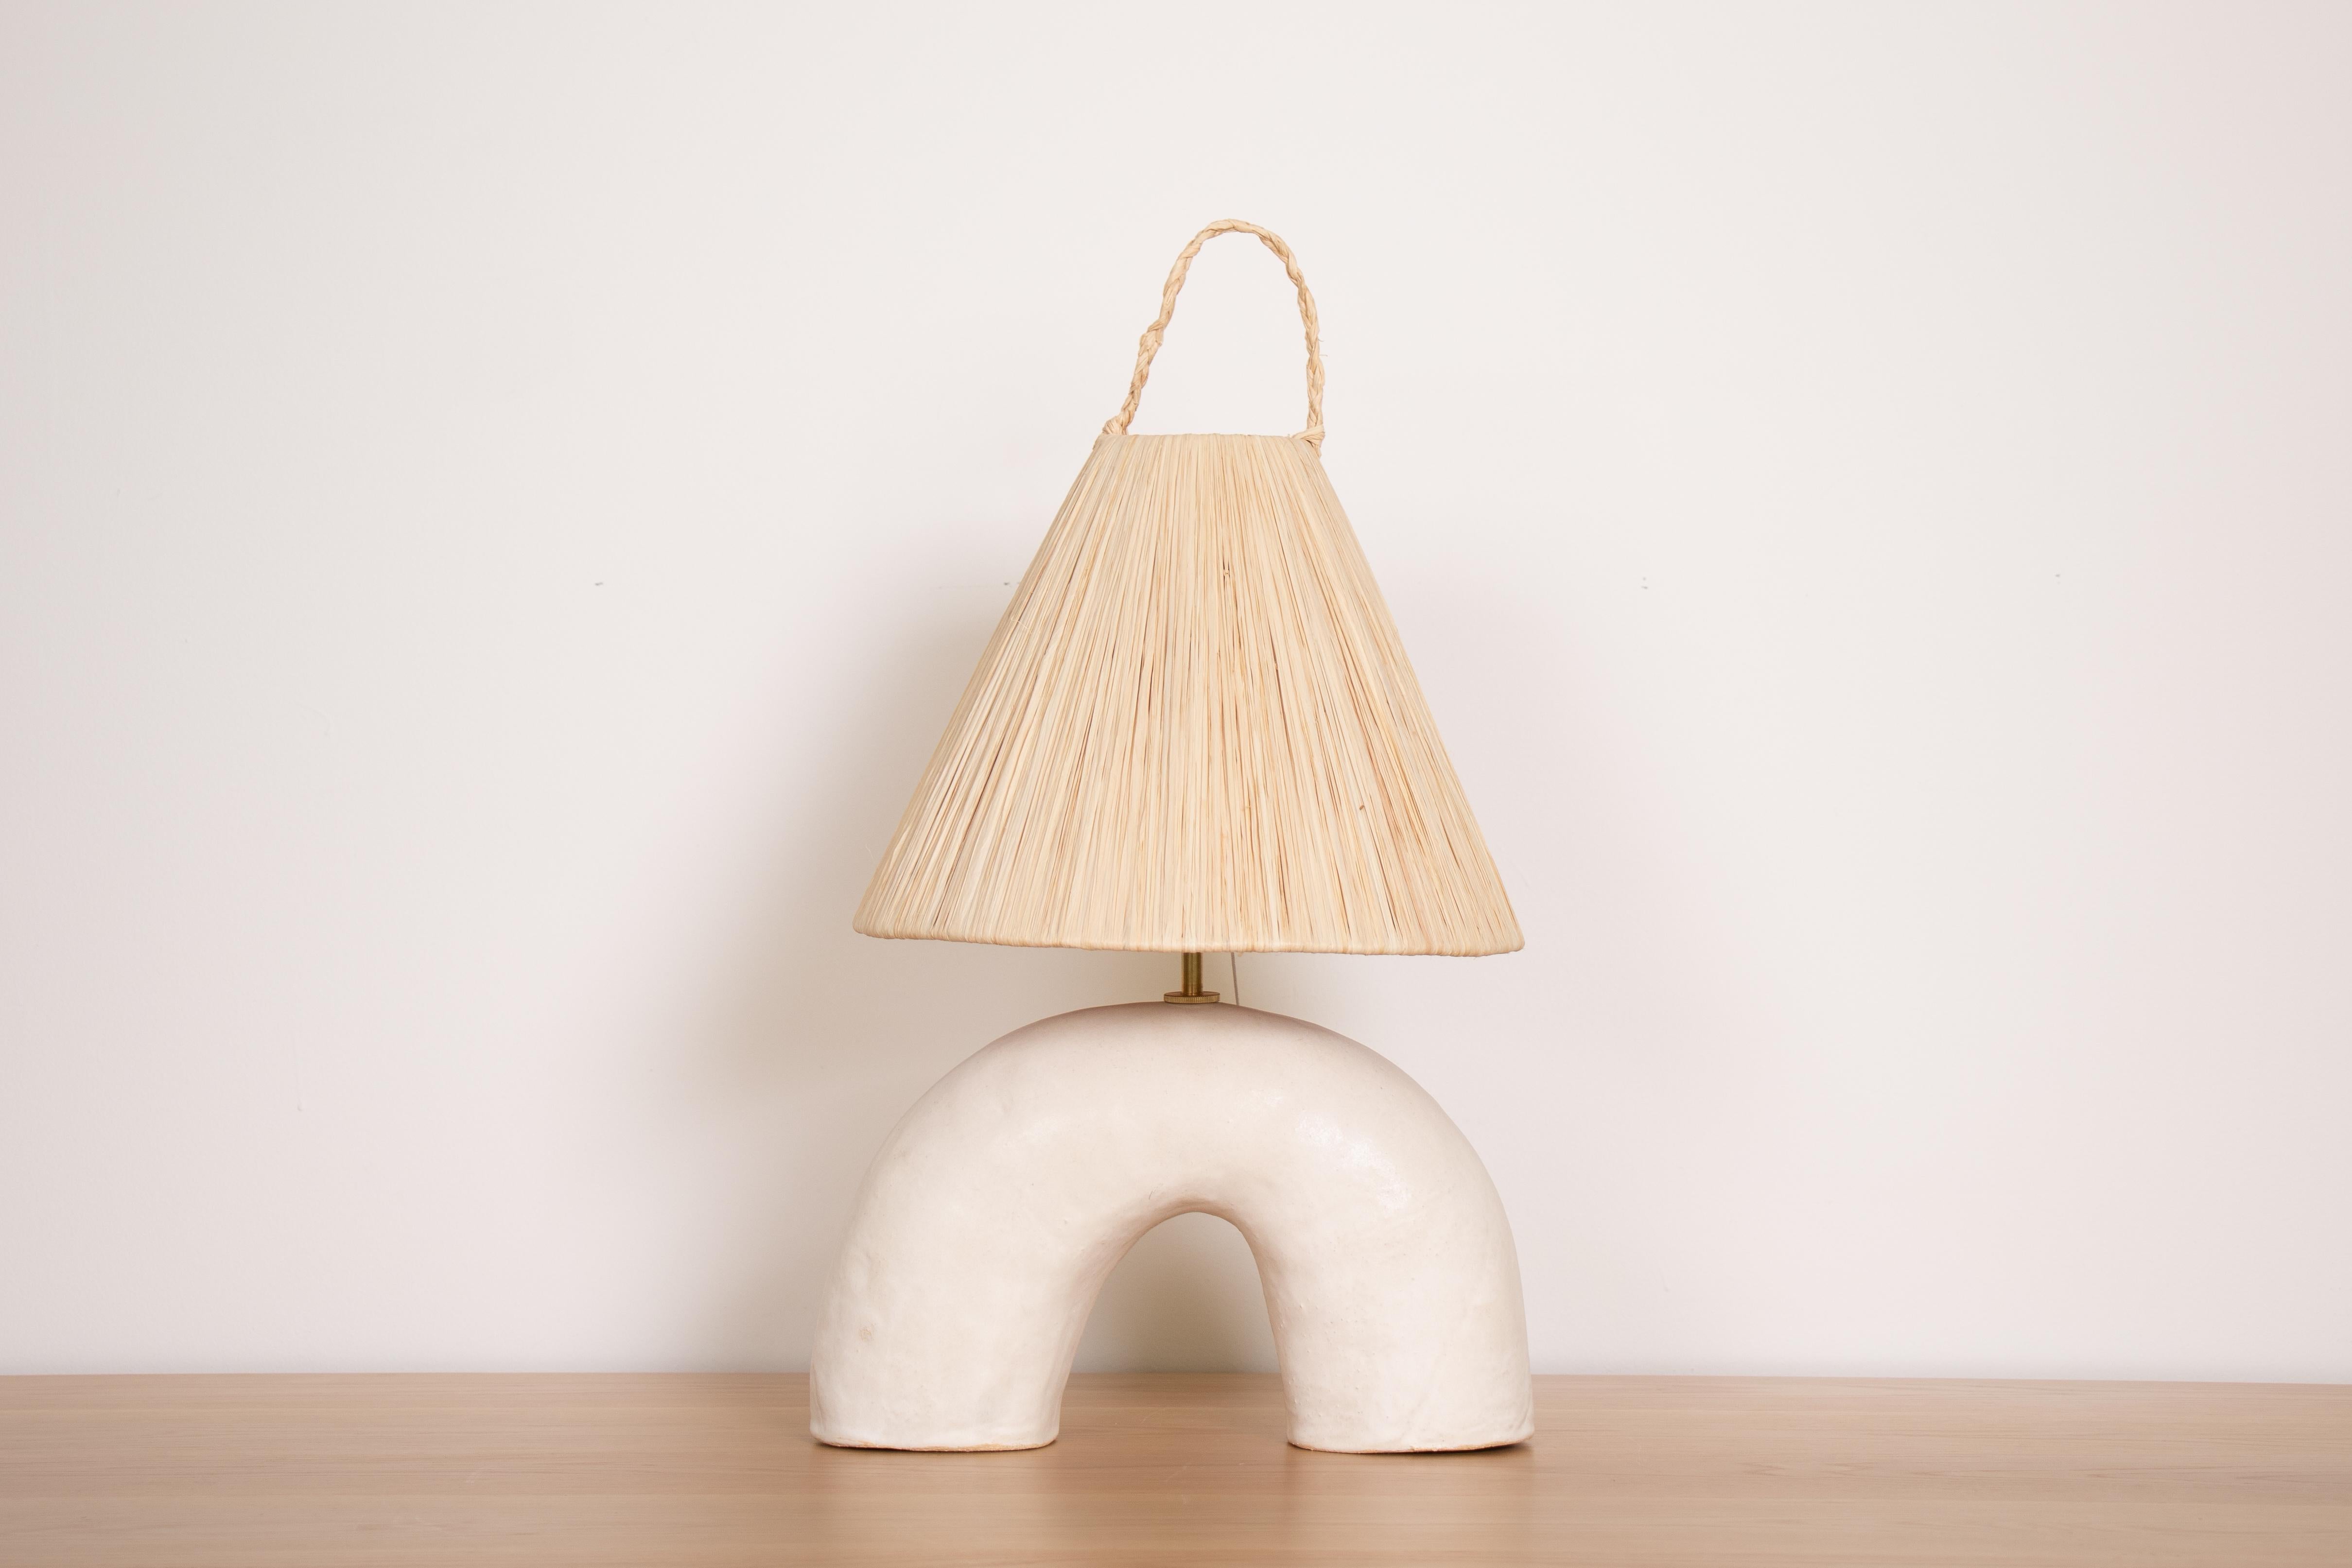 New ceramic lamp in arch form handmade from terracotta and white glaze. New wiring, brass stem neck, and natural raffia shade. Modern organic form with a nice mix of materials. Made in Spain. 

Bulb info: LED max 60 watt with medium base bulb